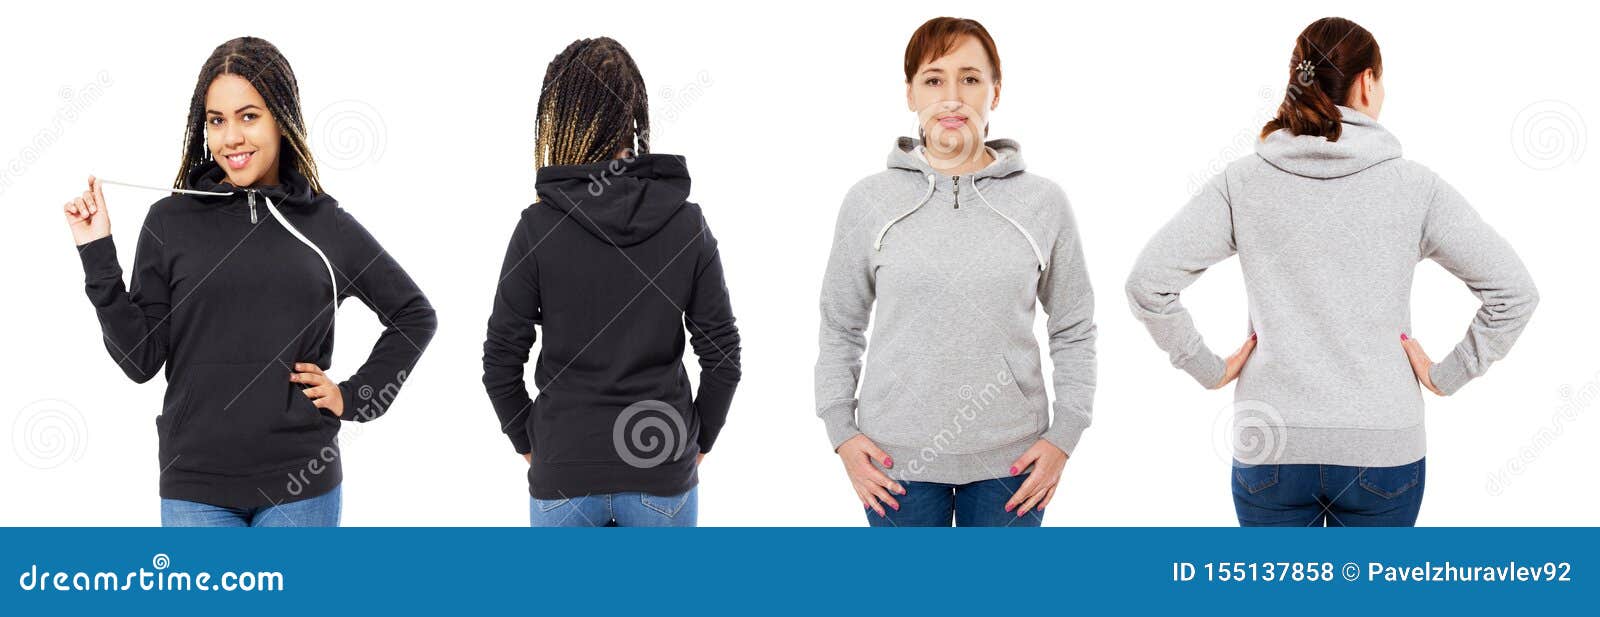 Download Stylish Afro American Girl In Black Hoodie Mock Up ...